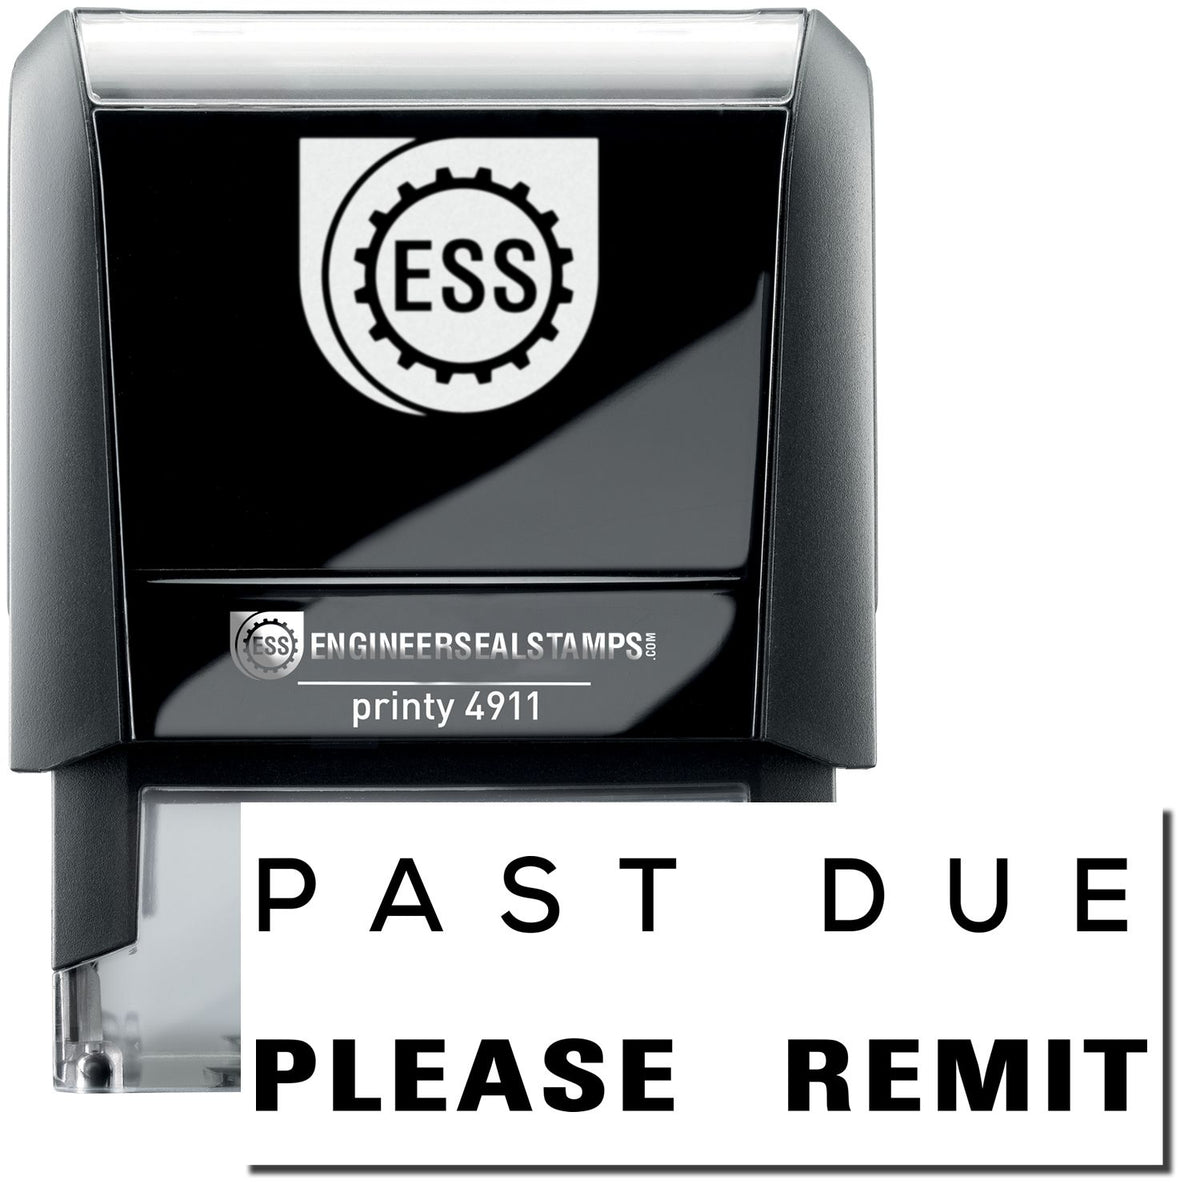 A self-inking stamp with a stamped image showing how the text &quot;PAST DUE PLEASE REMIT&quot; (&quot;PAST DUE&quot; in a narrow font and &quot;PLEASE REMIT&quot; in bold font) is displayed after stamping.